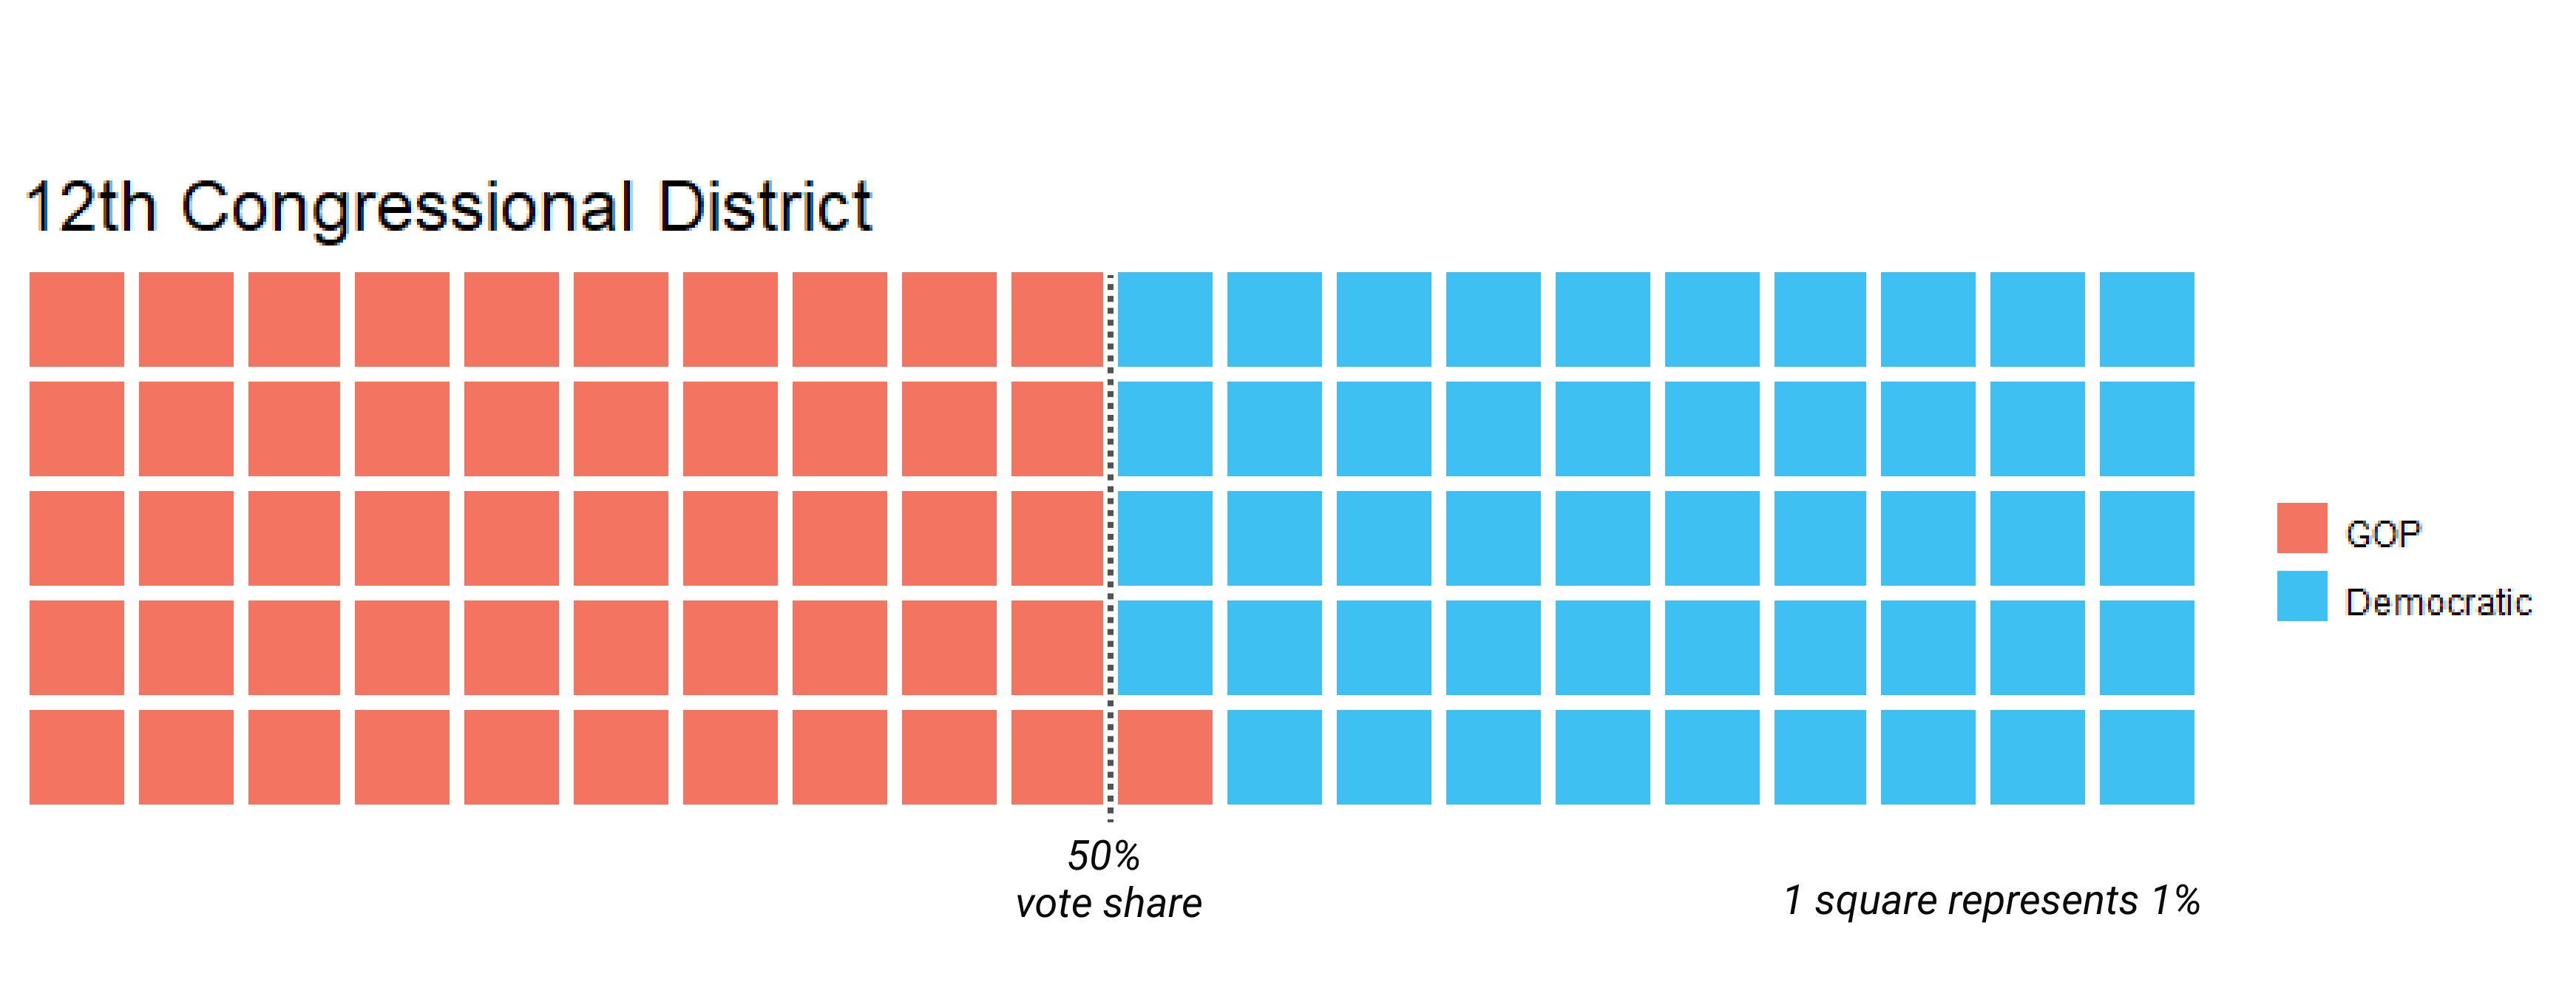 12th district partisan vote share